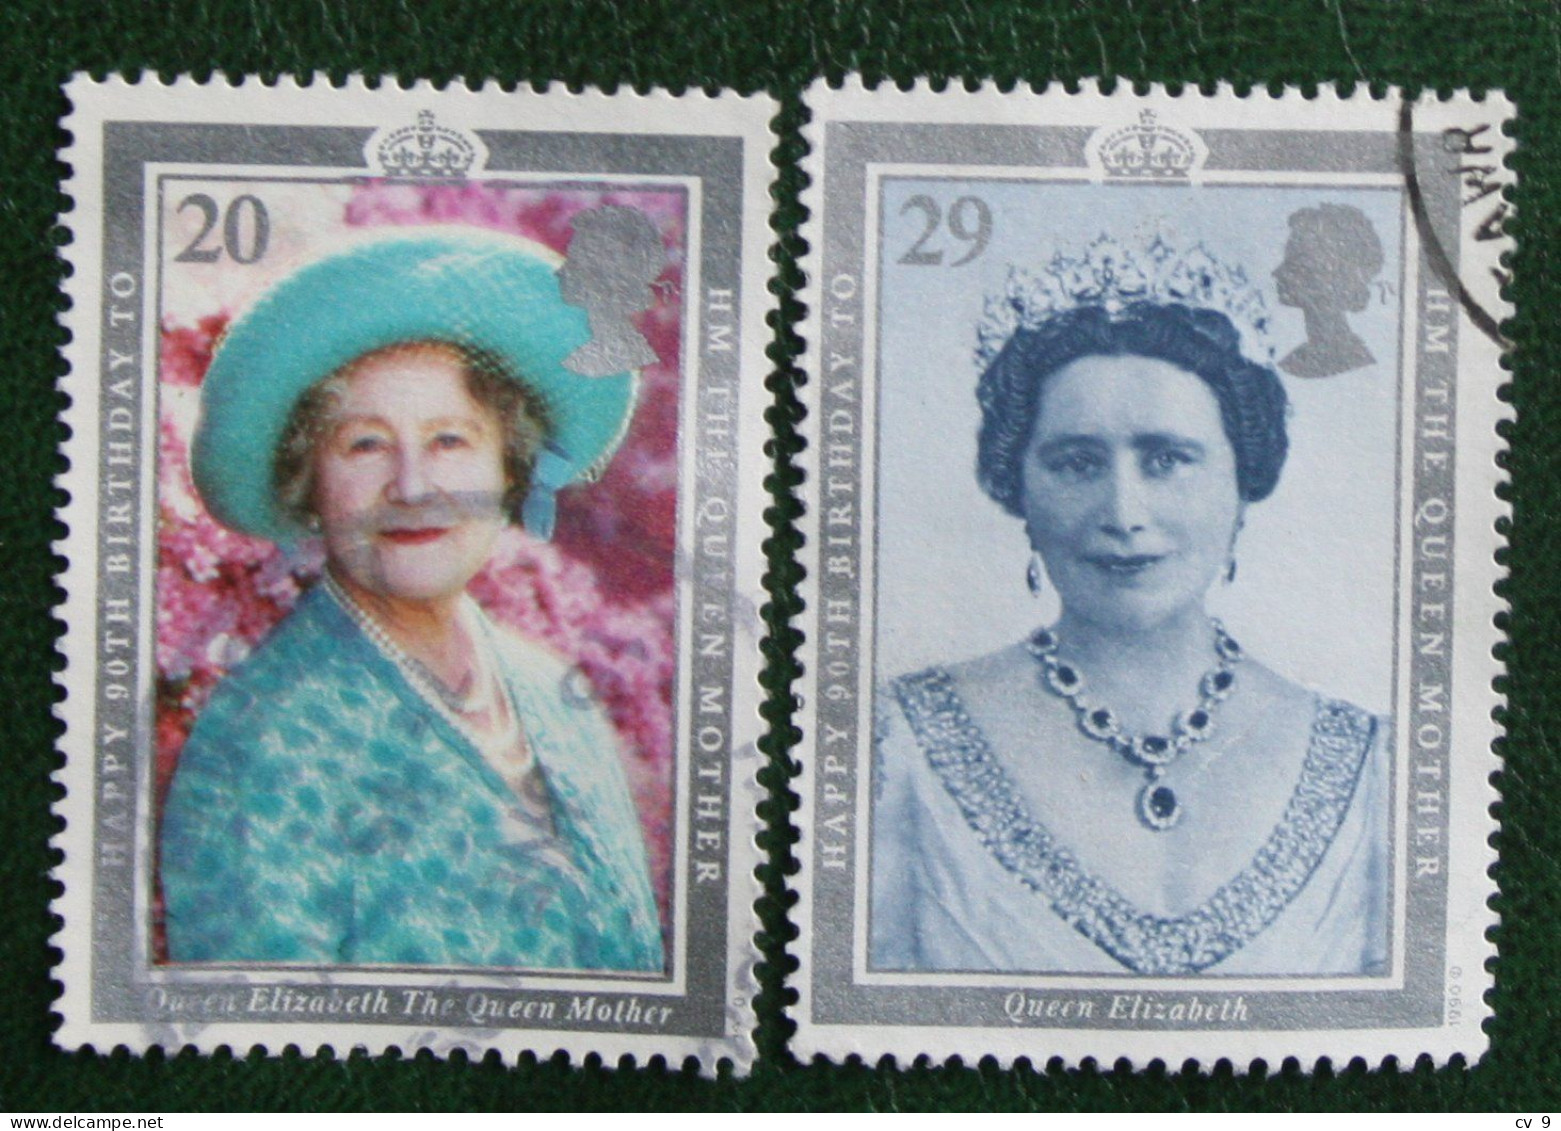 90th Birthday Of The Queen Mother (Mi 1275-1276) 1990 Used Gebruikt Oblitere ENGLAND GRANDE-BRETAGNE GB GREAT BRITAIN - Used Stamps